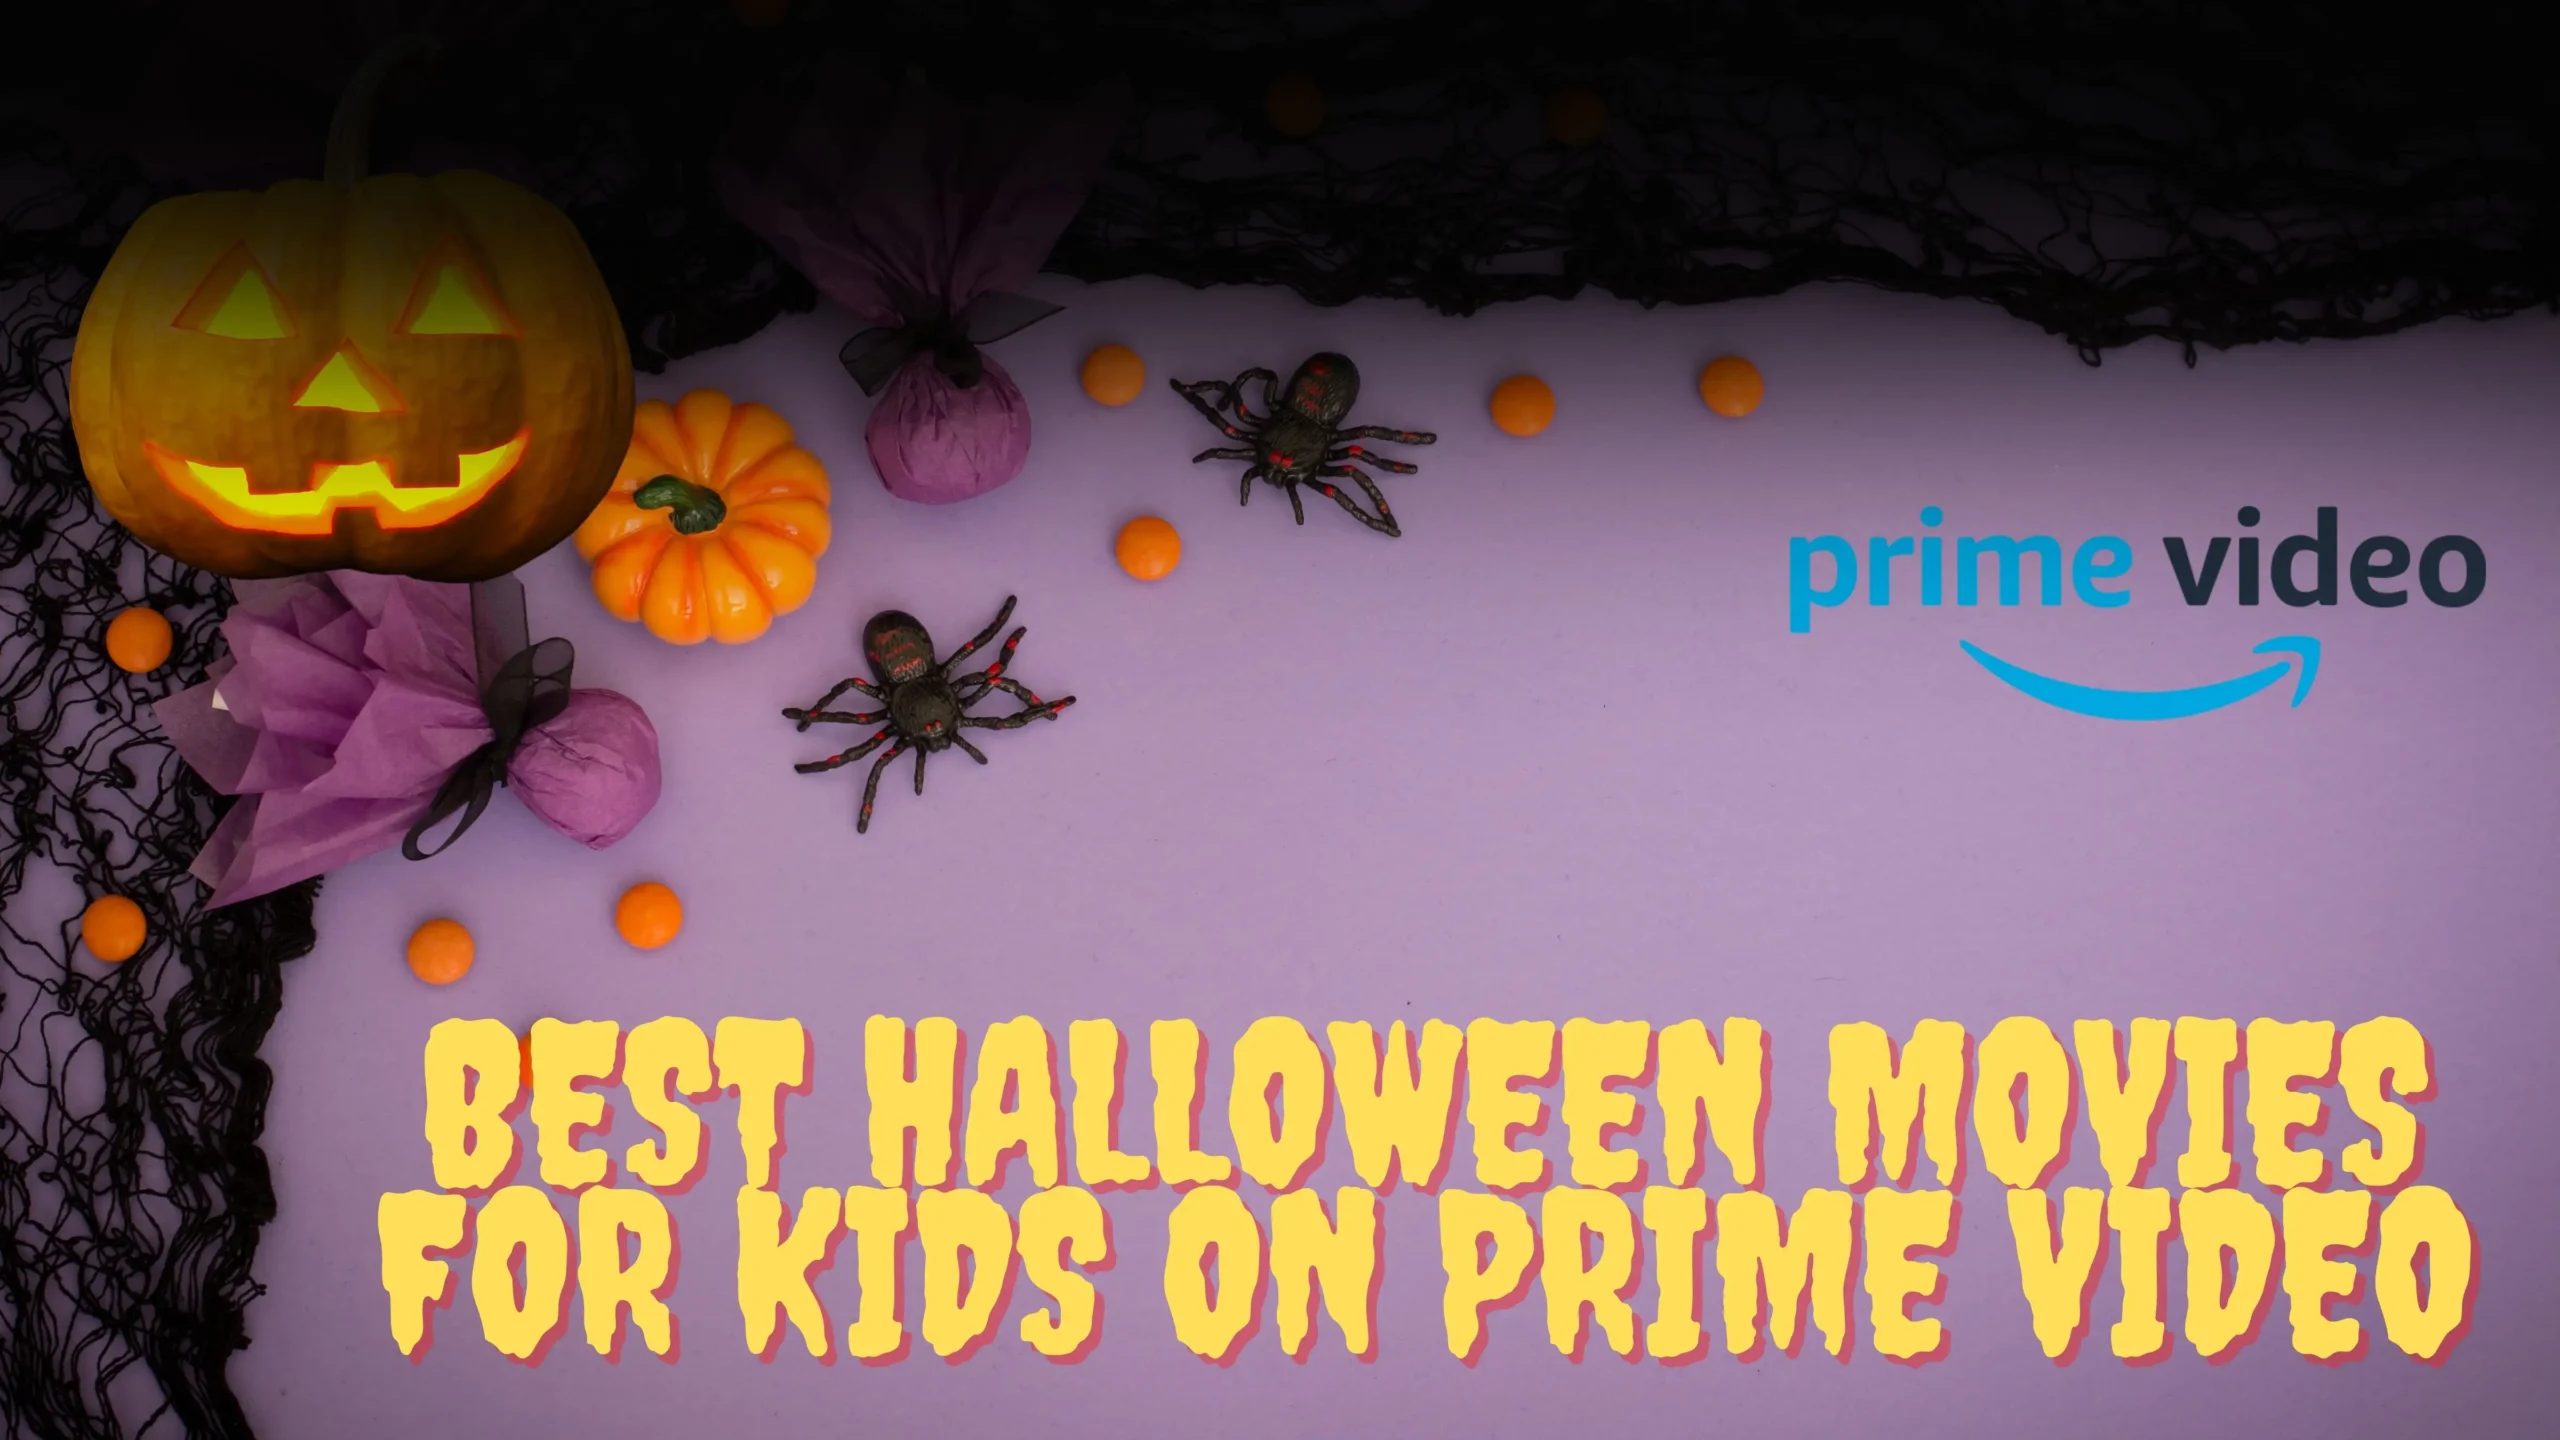 Best Halloween Movies for Kids on Prime Video